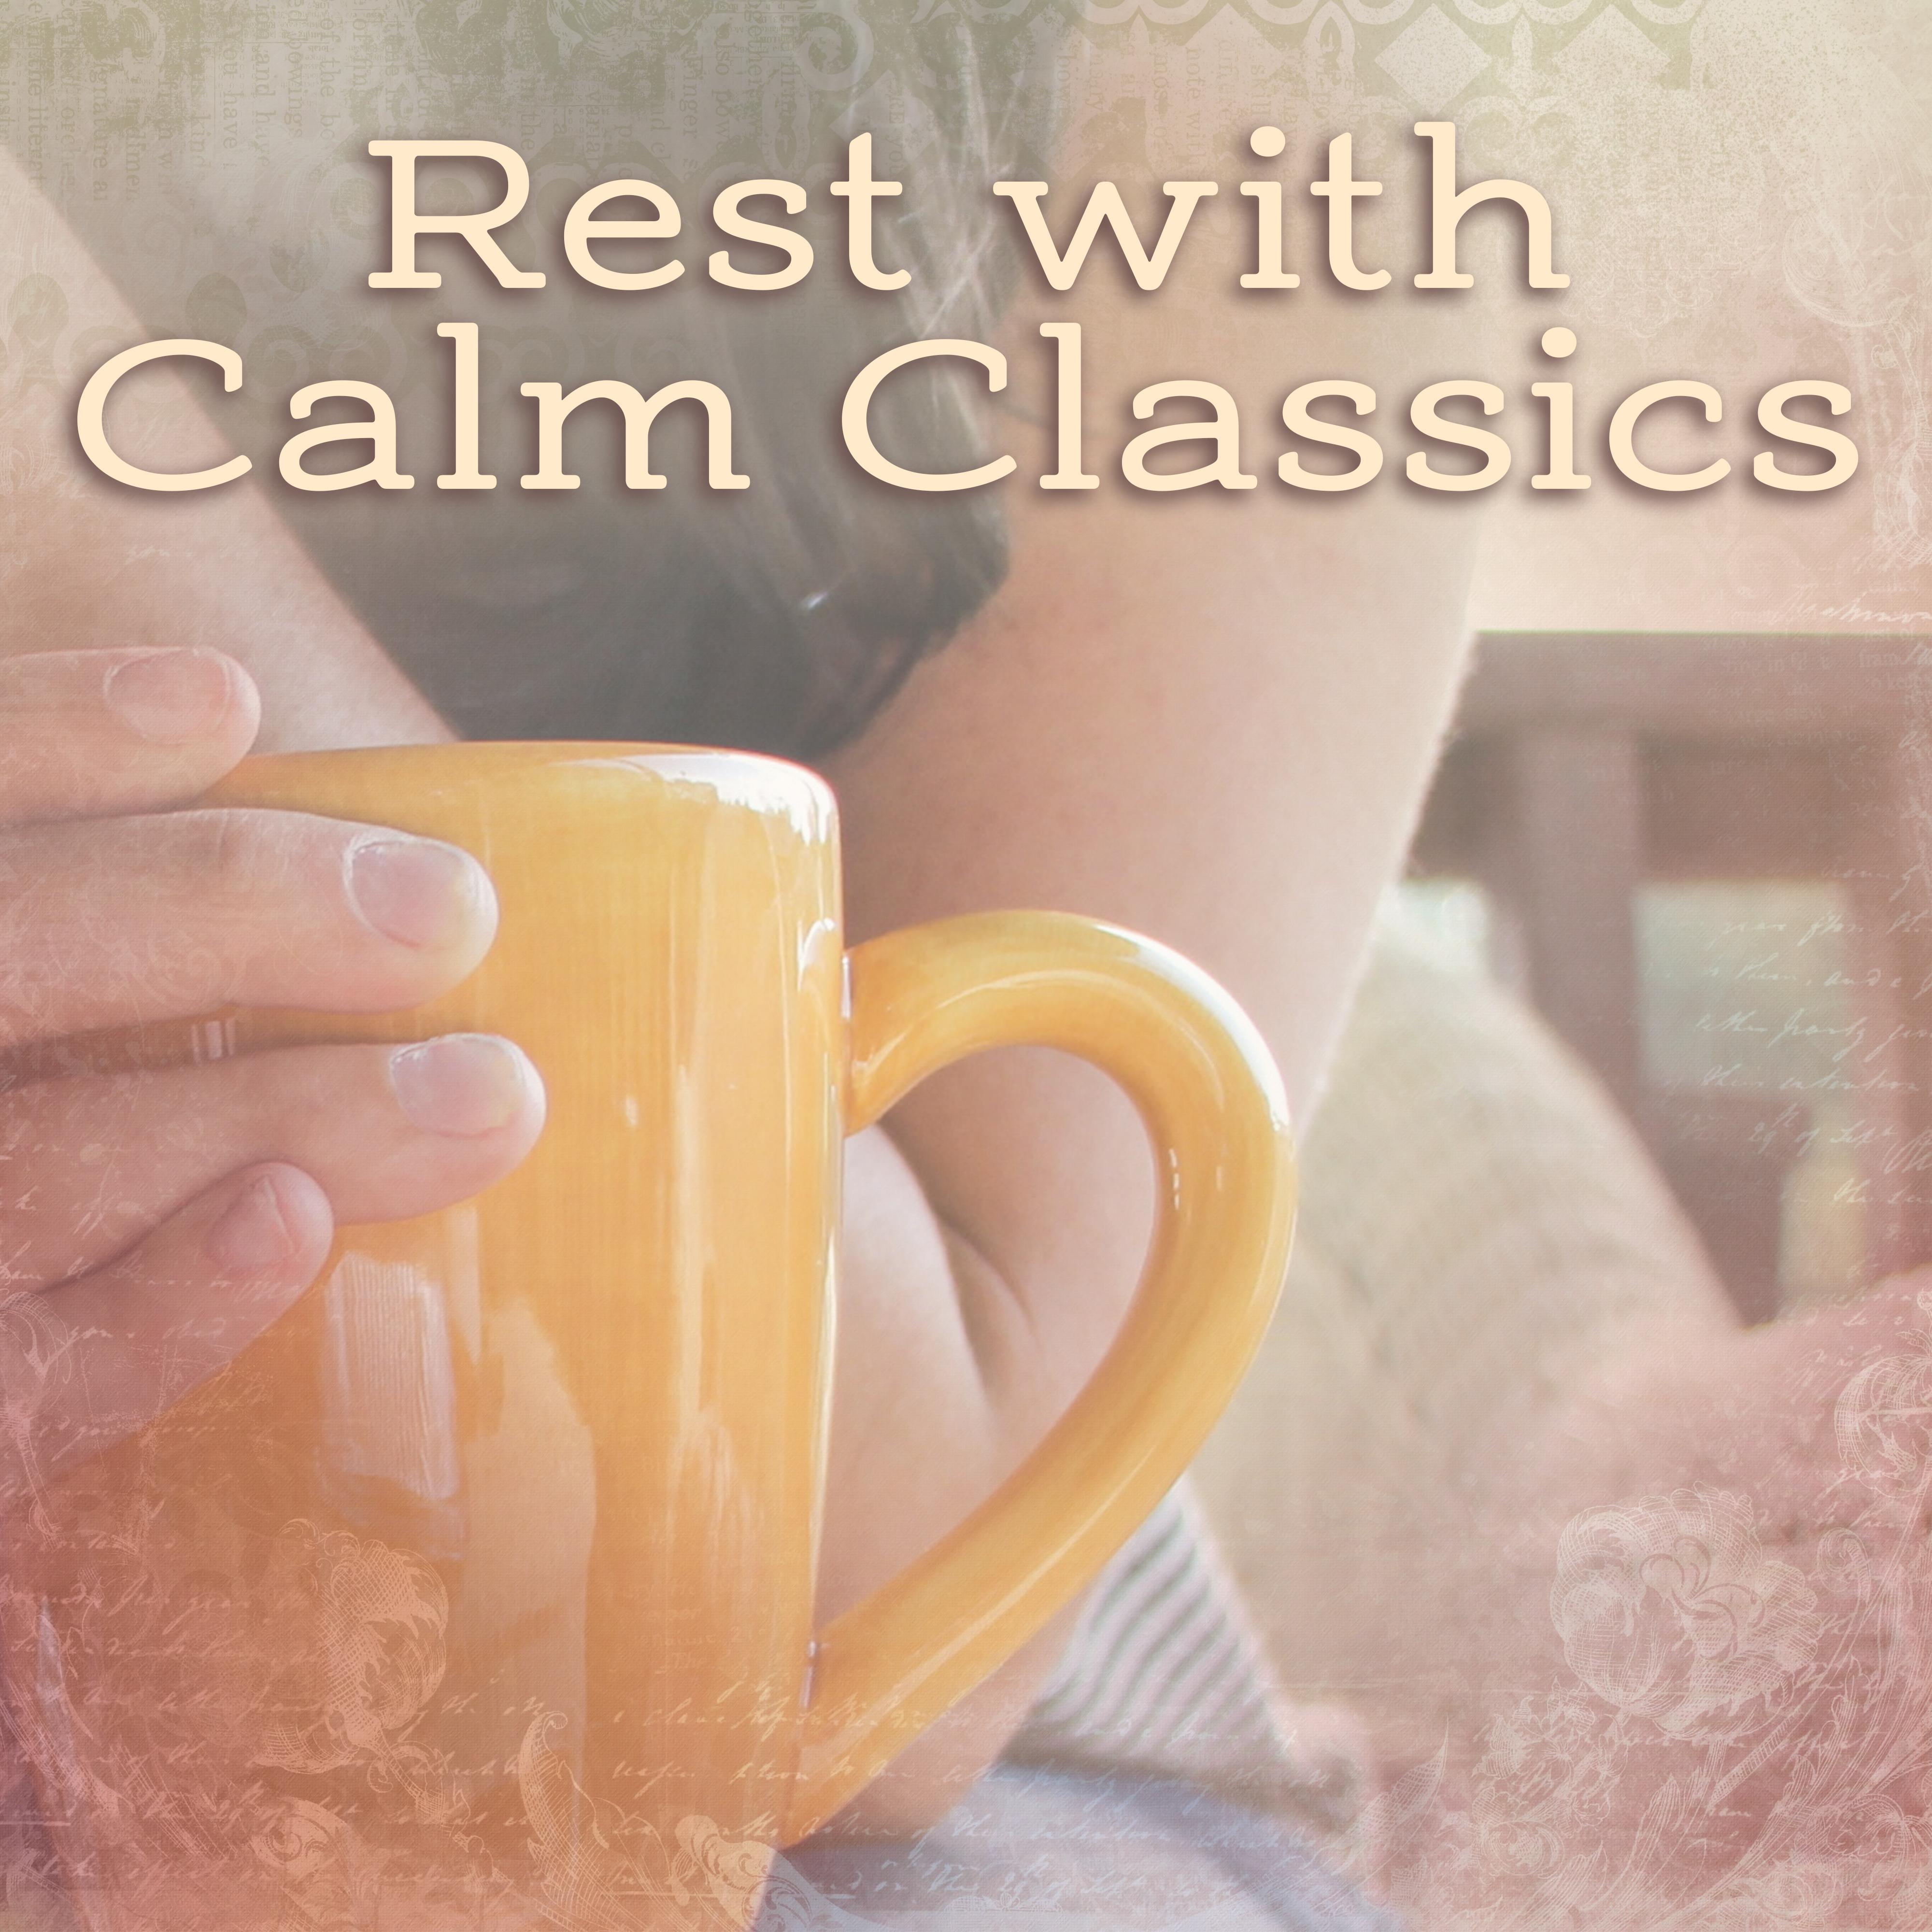 Rest with Calm Classics – Stress Relief, Classical Relaxation, Music to Calm Down, Easy Listening